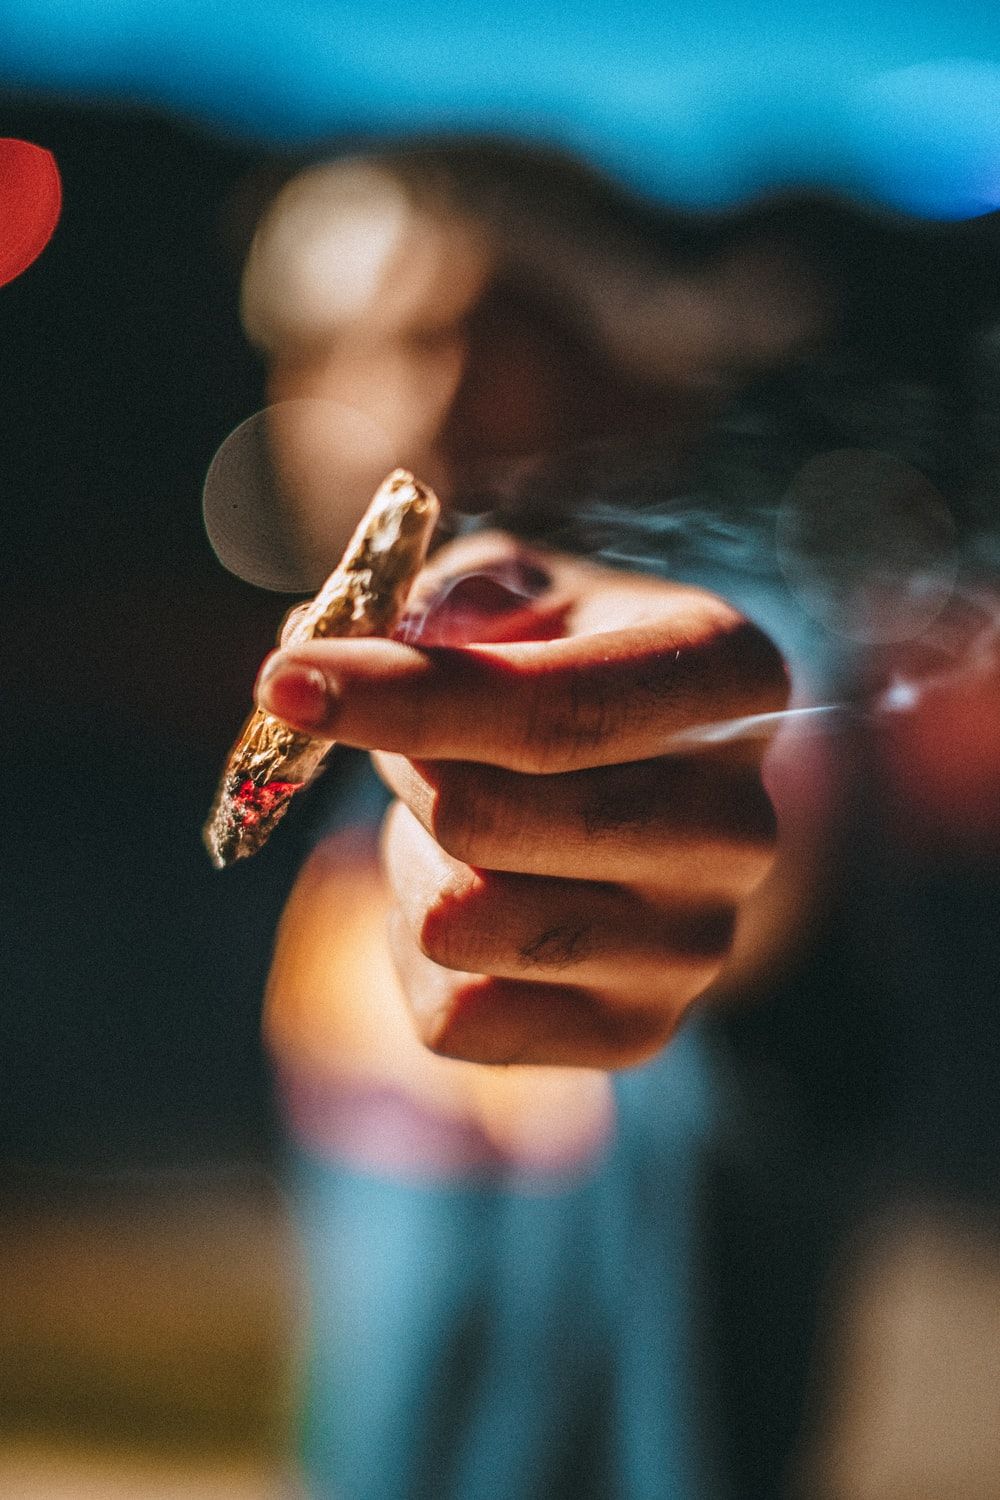 person holding lighted joint photo